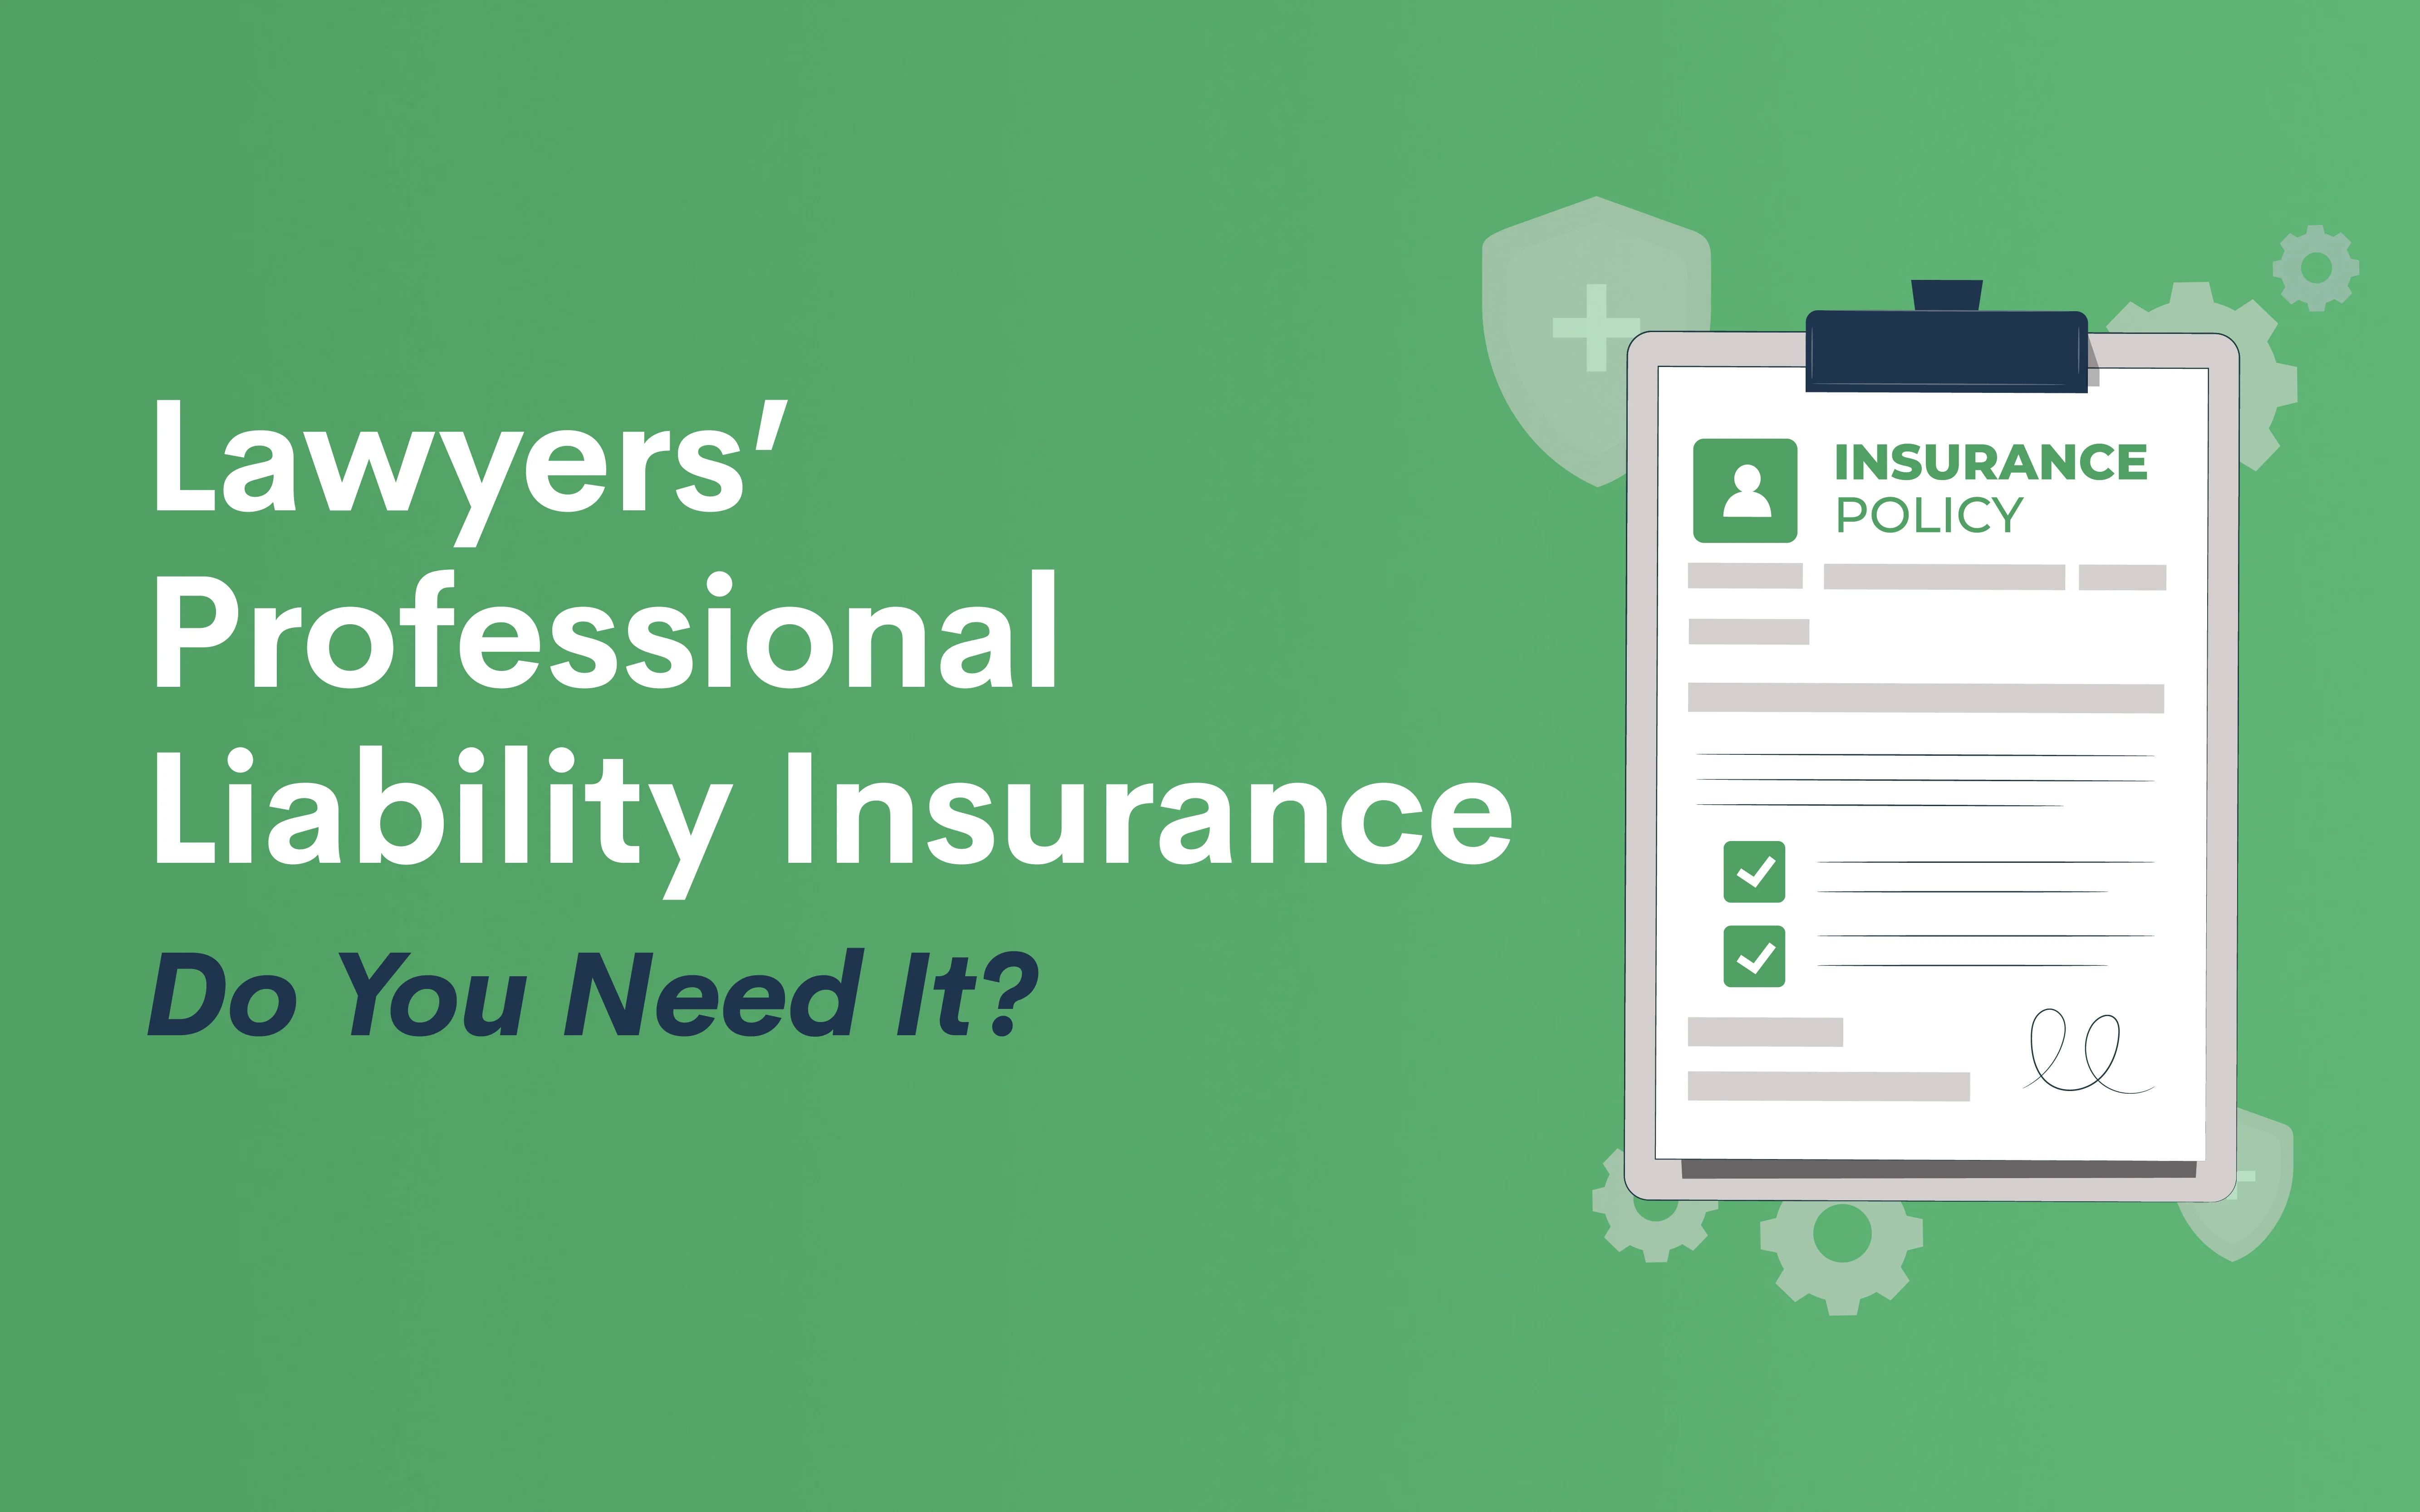 Lawyers’ Professional Liability Insurance: Do You Need It?